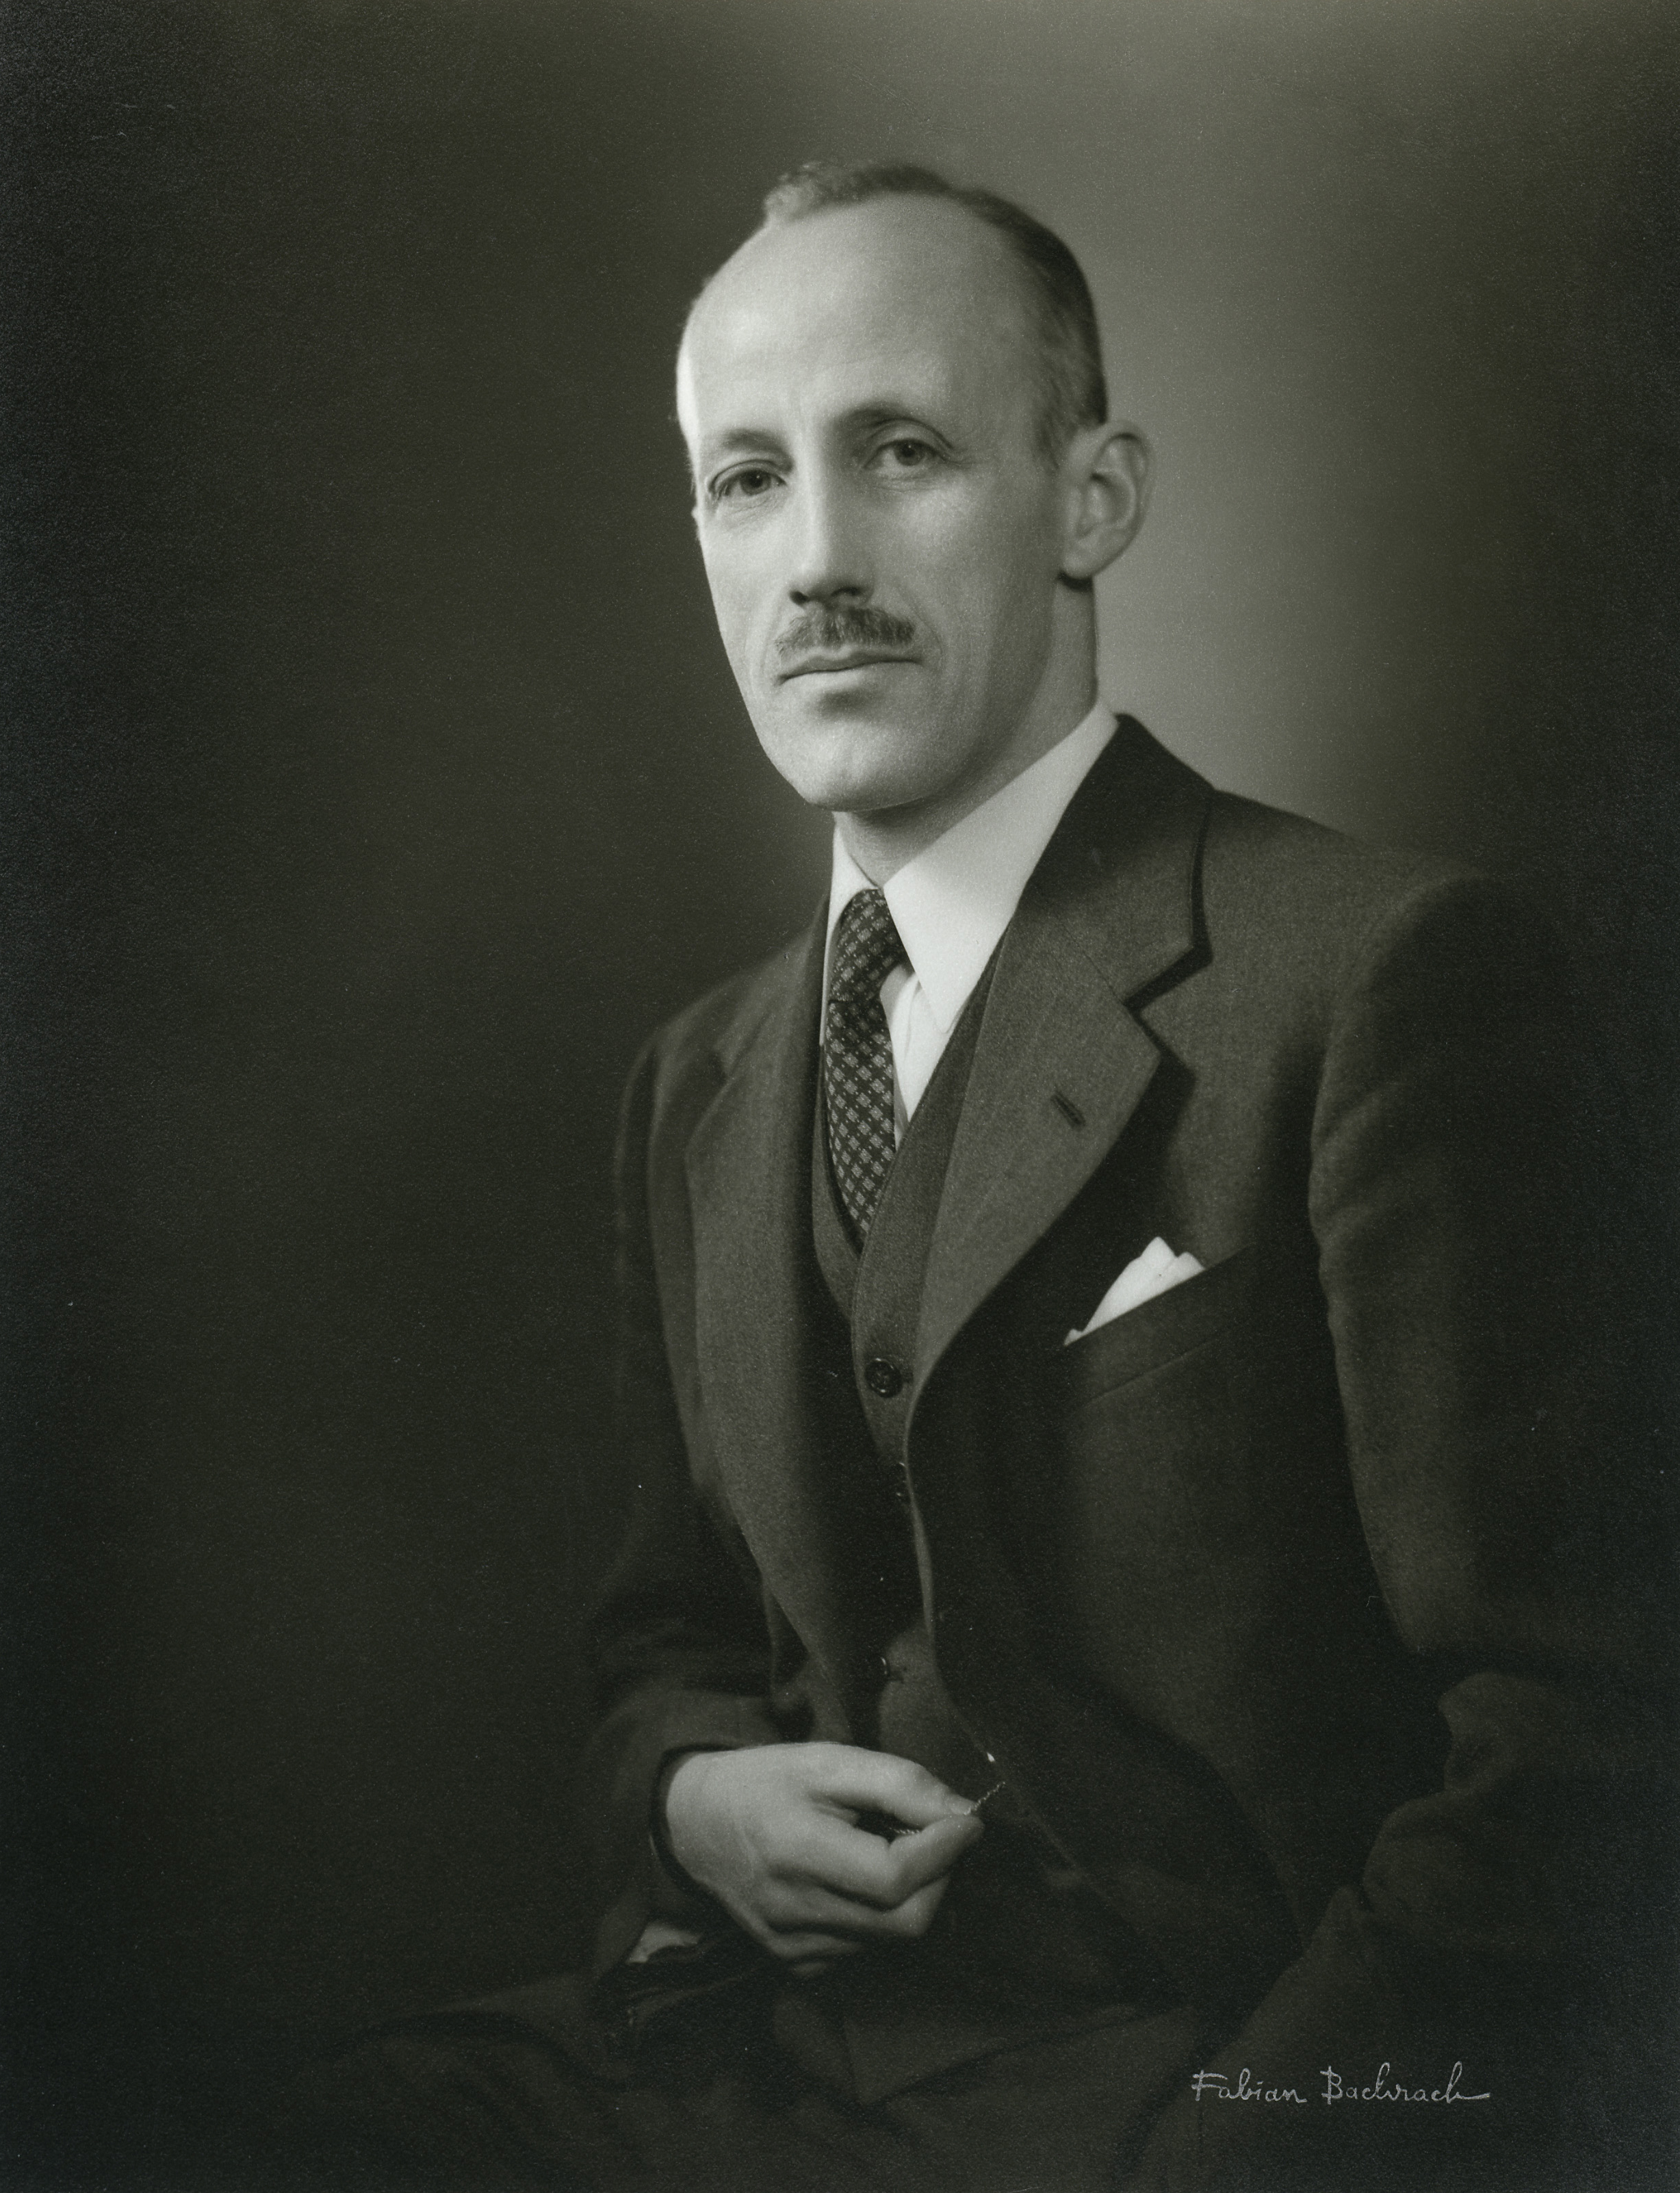 black and white portrait of a seated white man with a moustache, wearing a three-piece suit